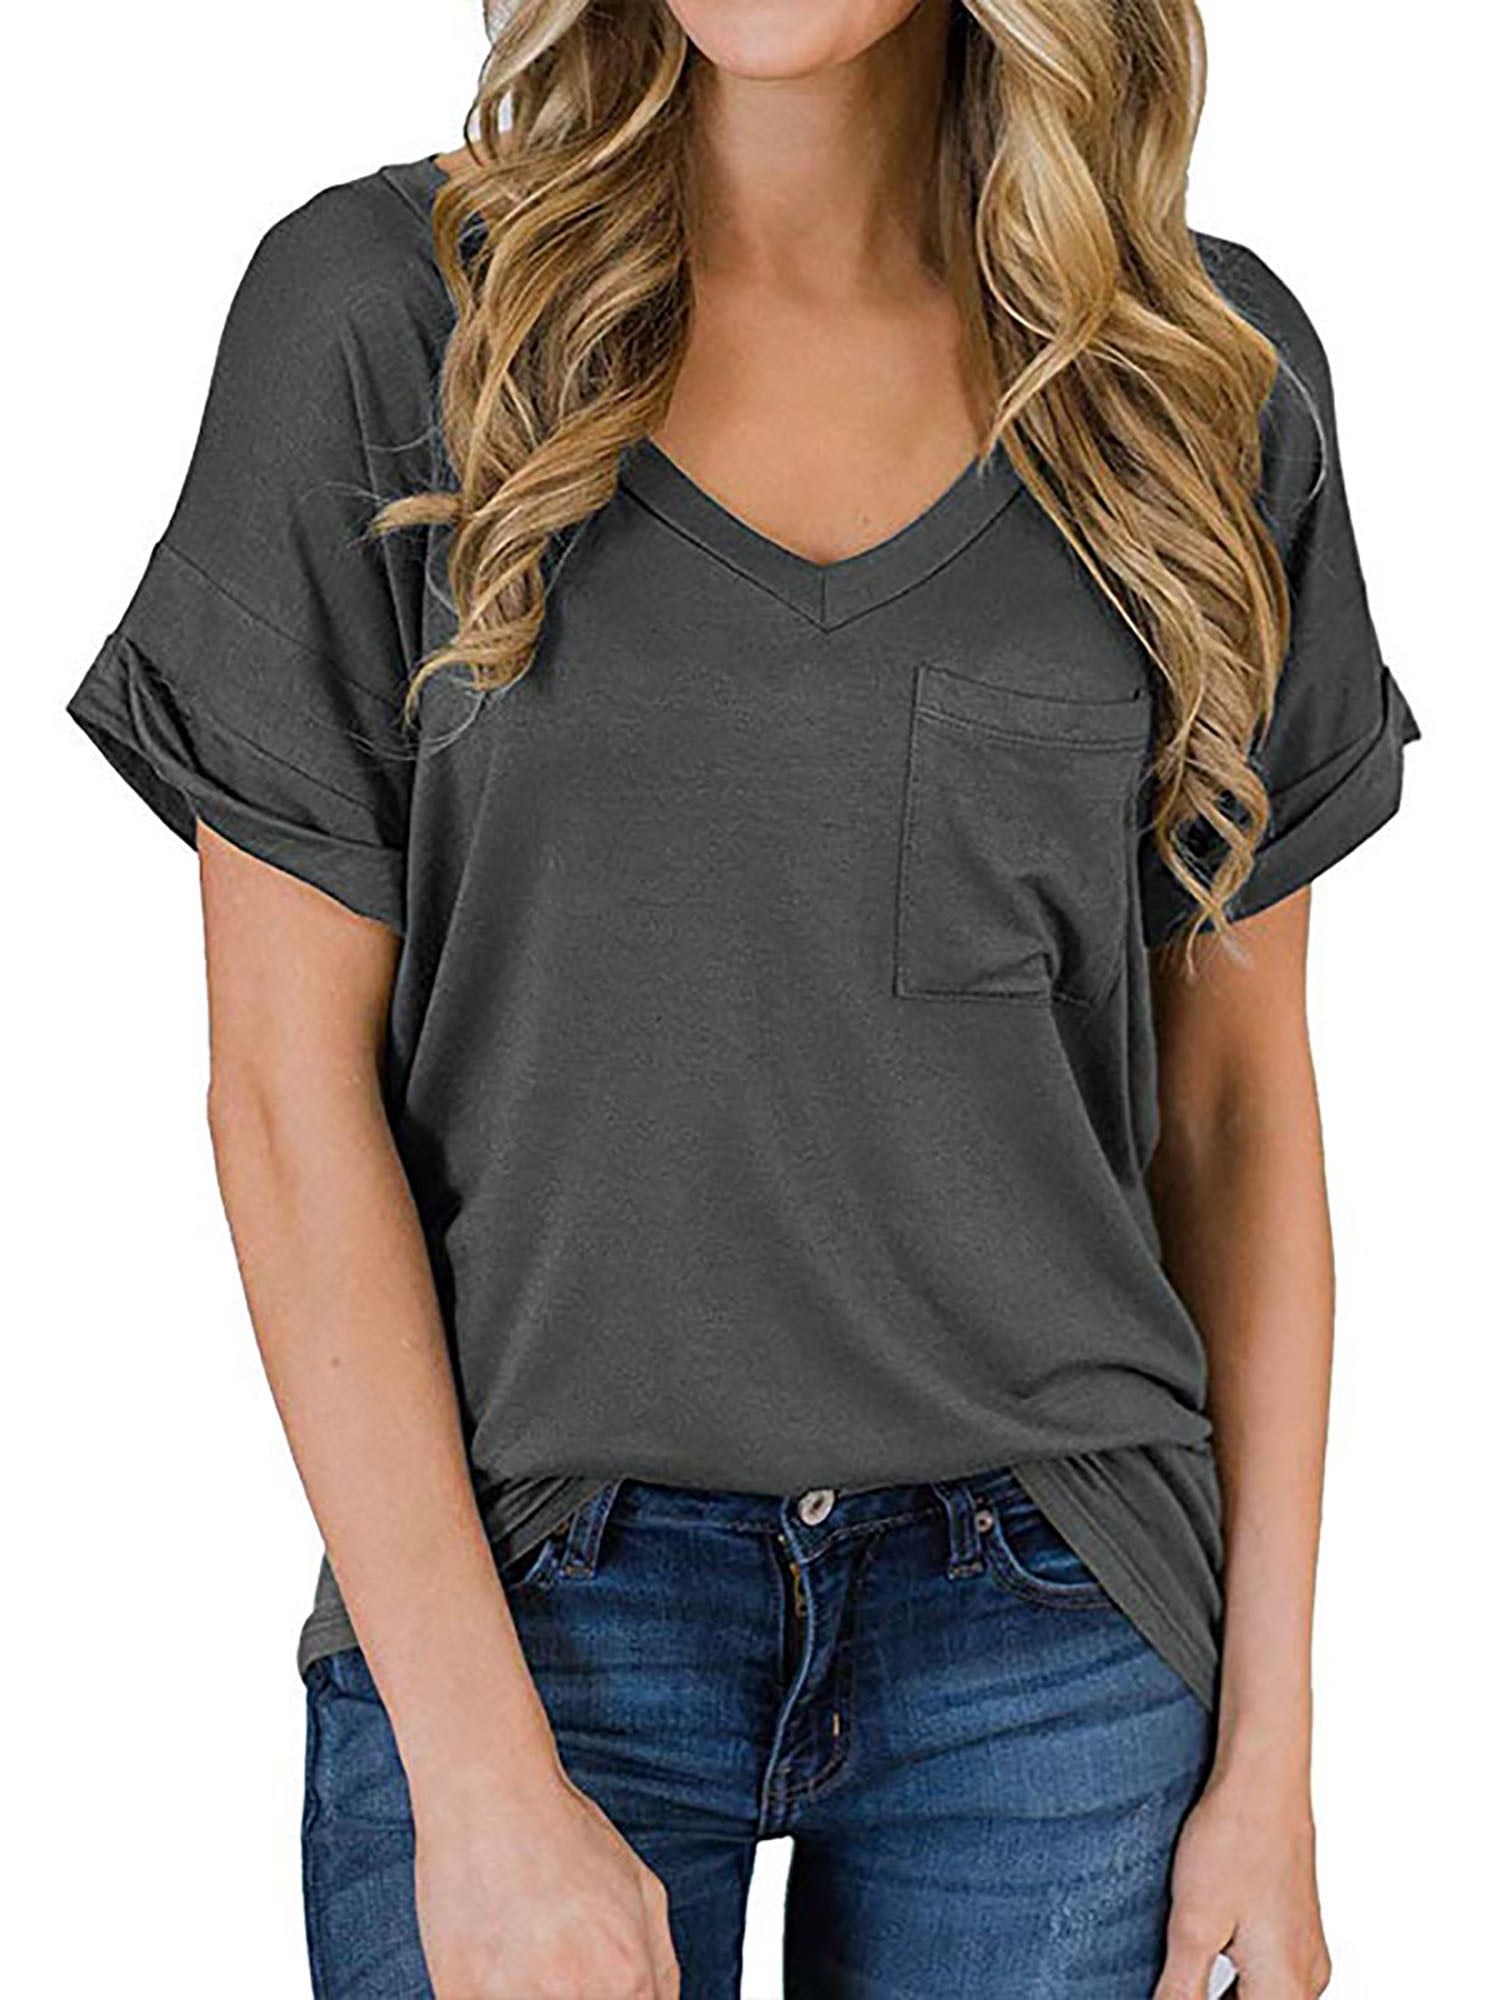 Tunics Tops for Women,Womens Short Sleeve V-Neck Shirts Casual Pocket Solid Loose Tee Tops Summer T-Shirt Blouse Tops 